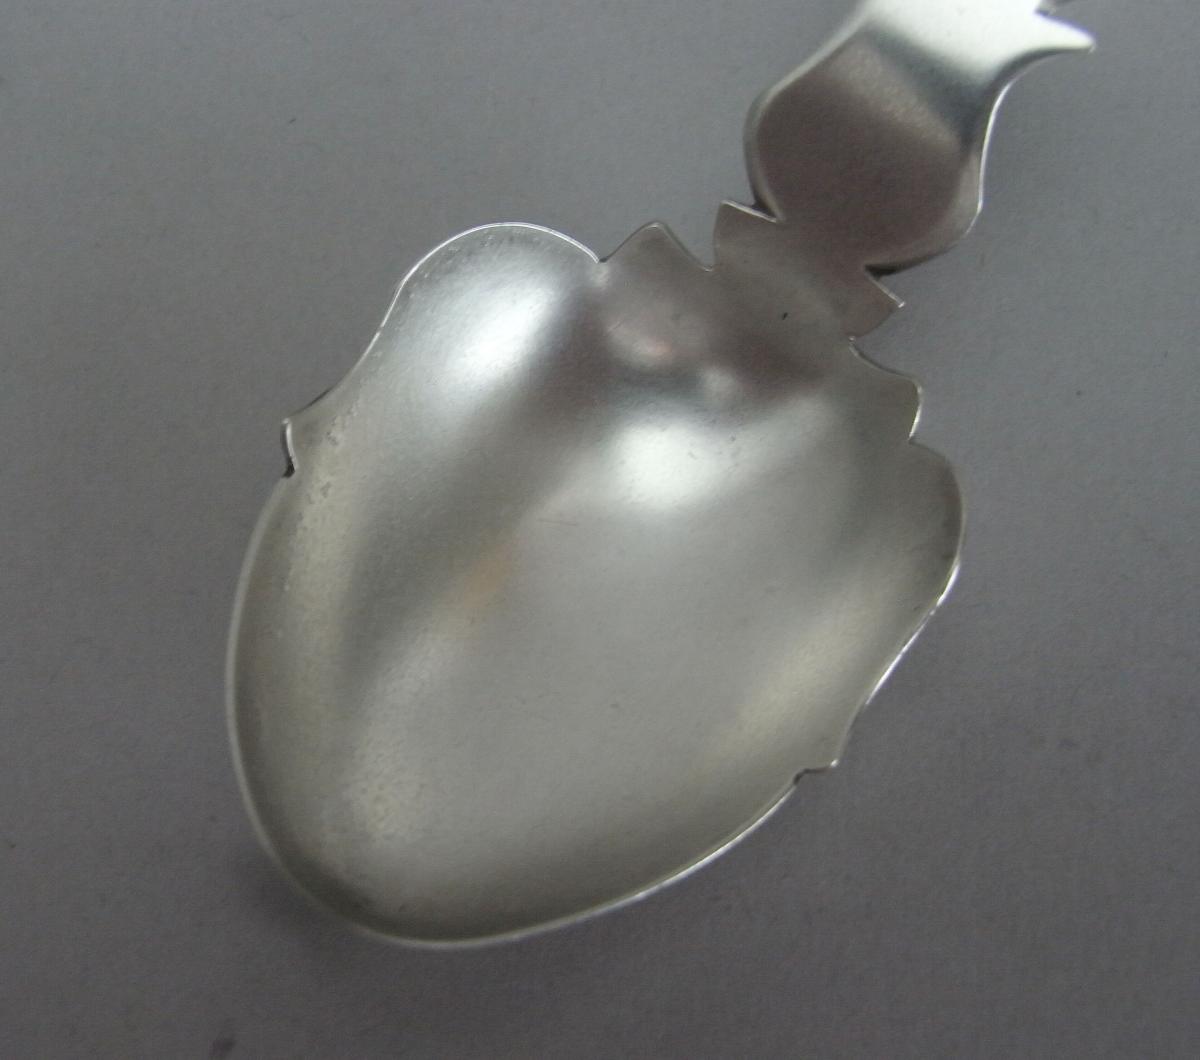 A rare George III "Thomas James" Acorn Caddy Spoon made in London in 1810 by Thomas James